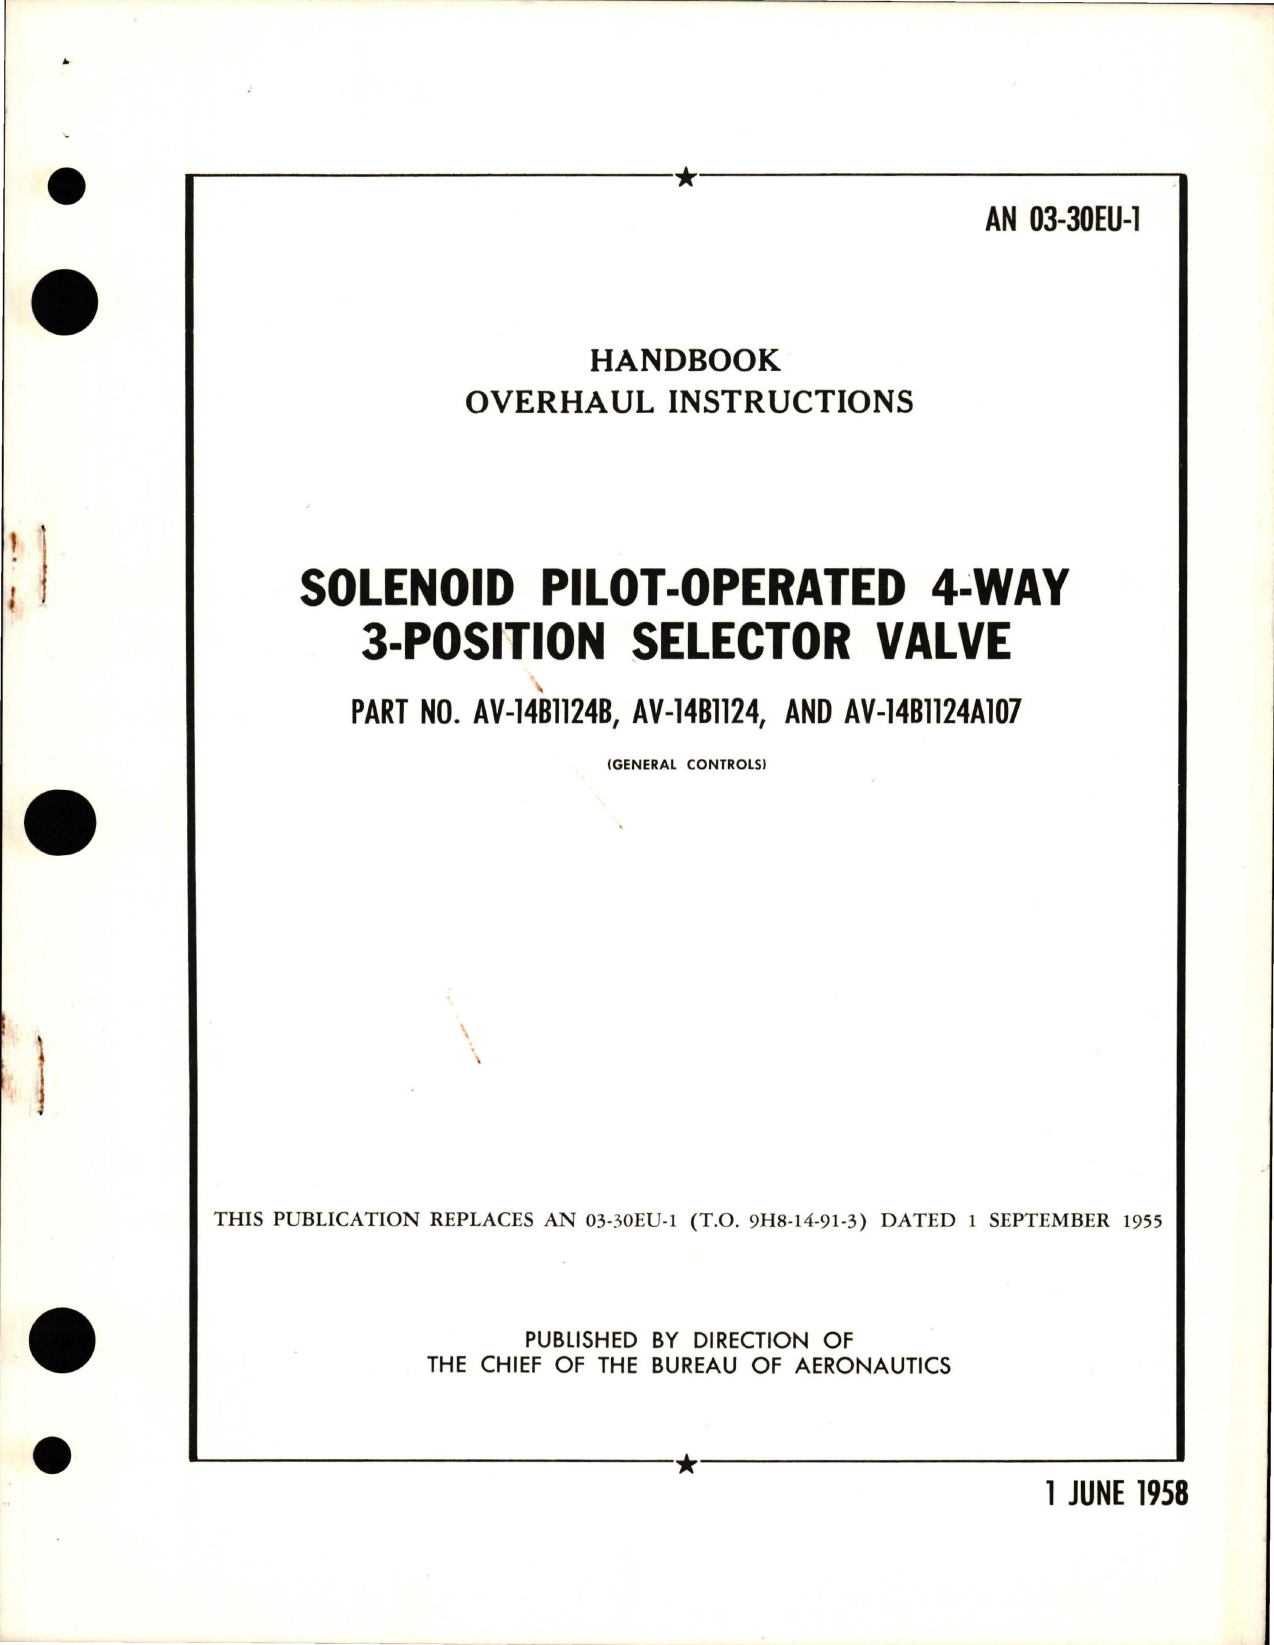 Sample page 1 from AirCorps Library document: Overhaul Instructions for Solenoid Pilot Operated 4-Way 3-Position Selector Valve